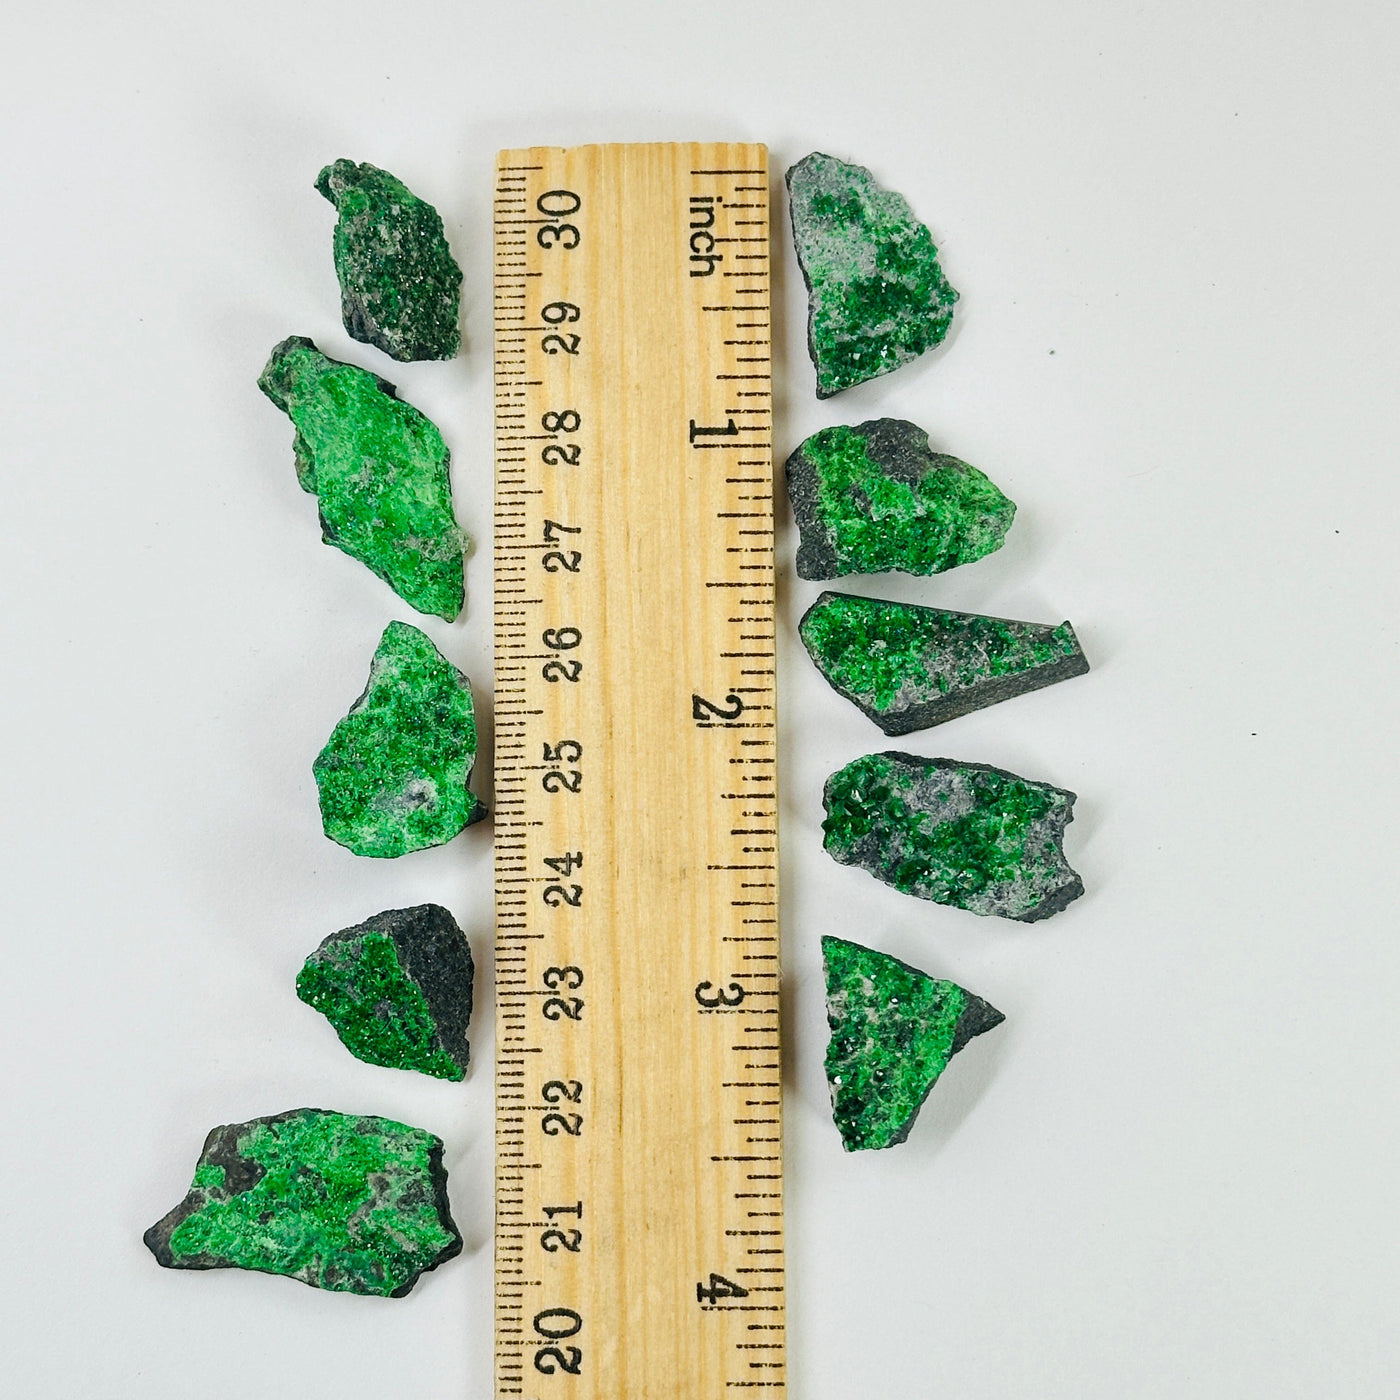 uvarovite pieces next to a ruler for size reference